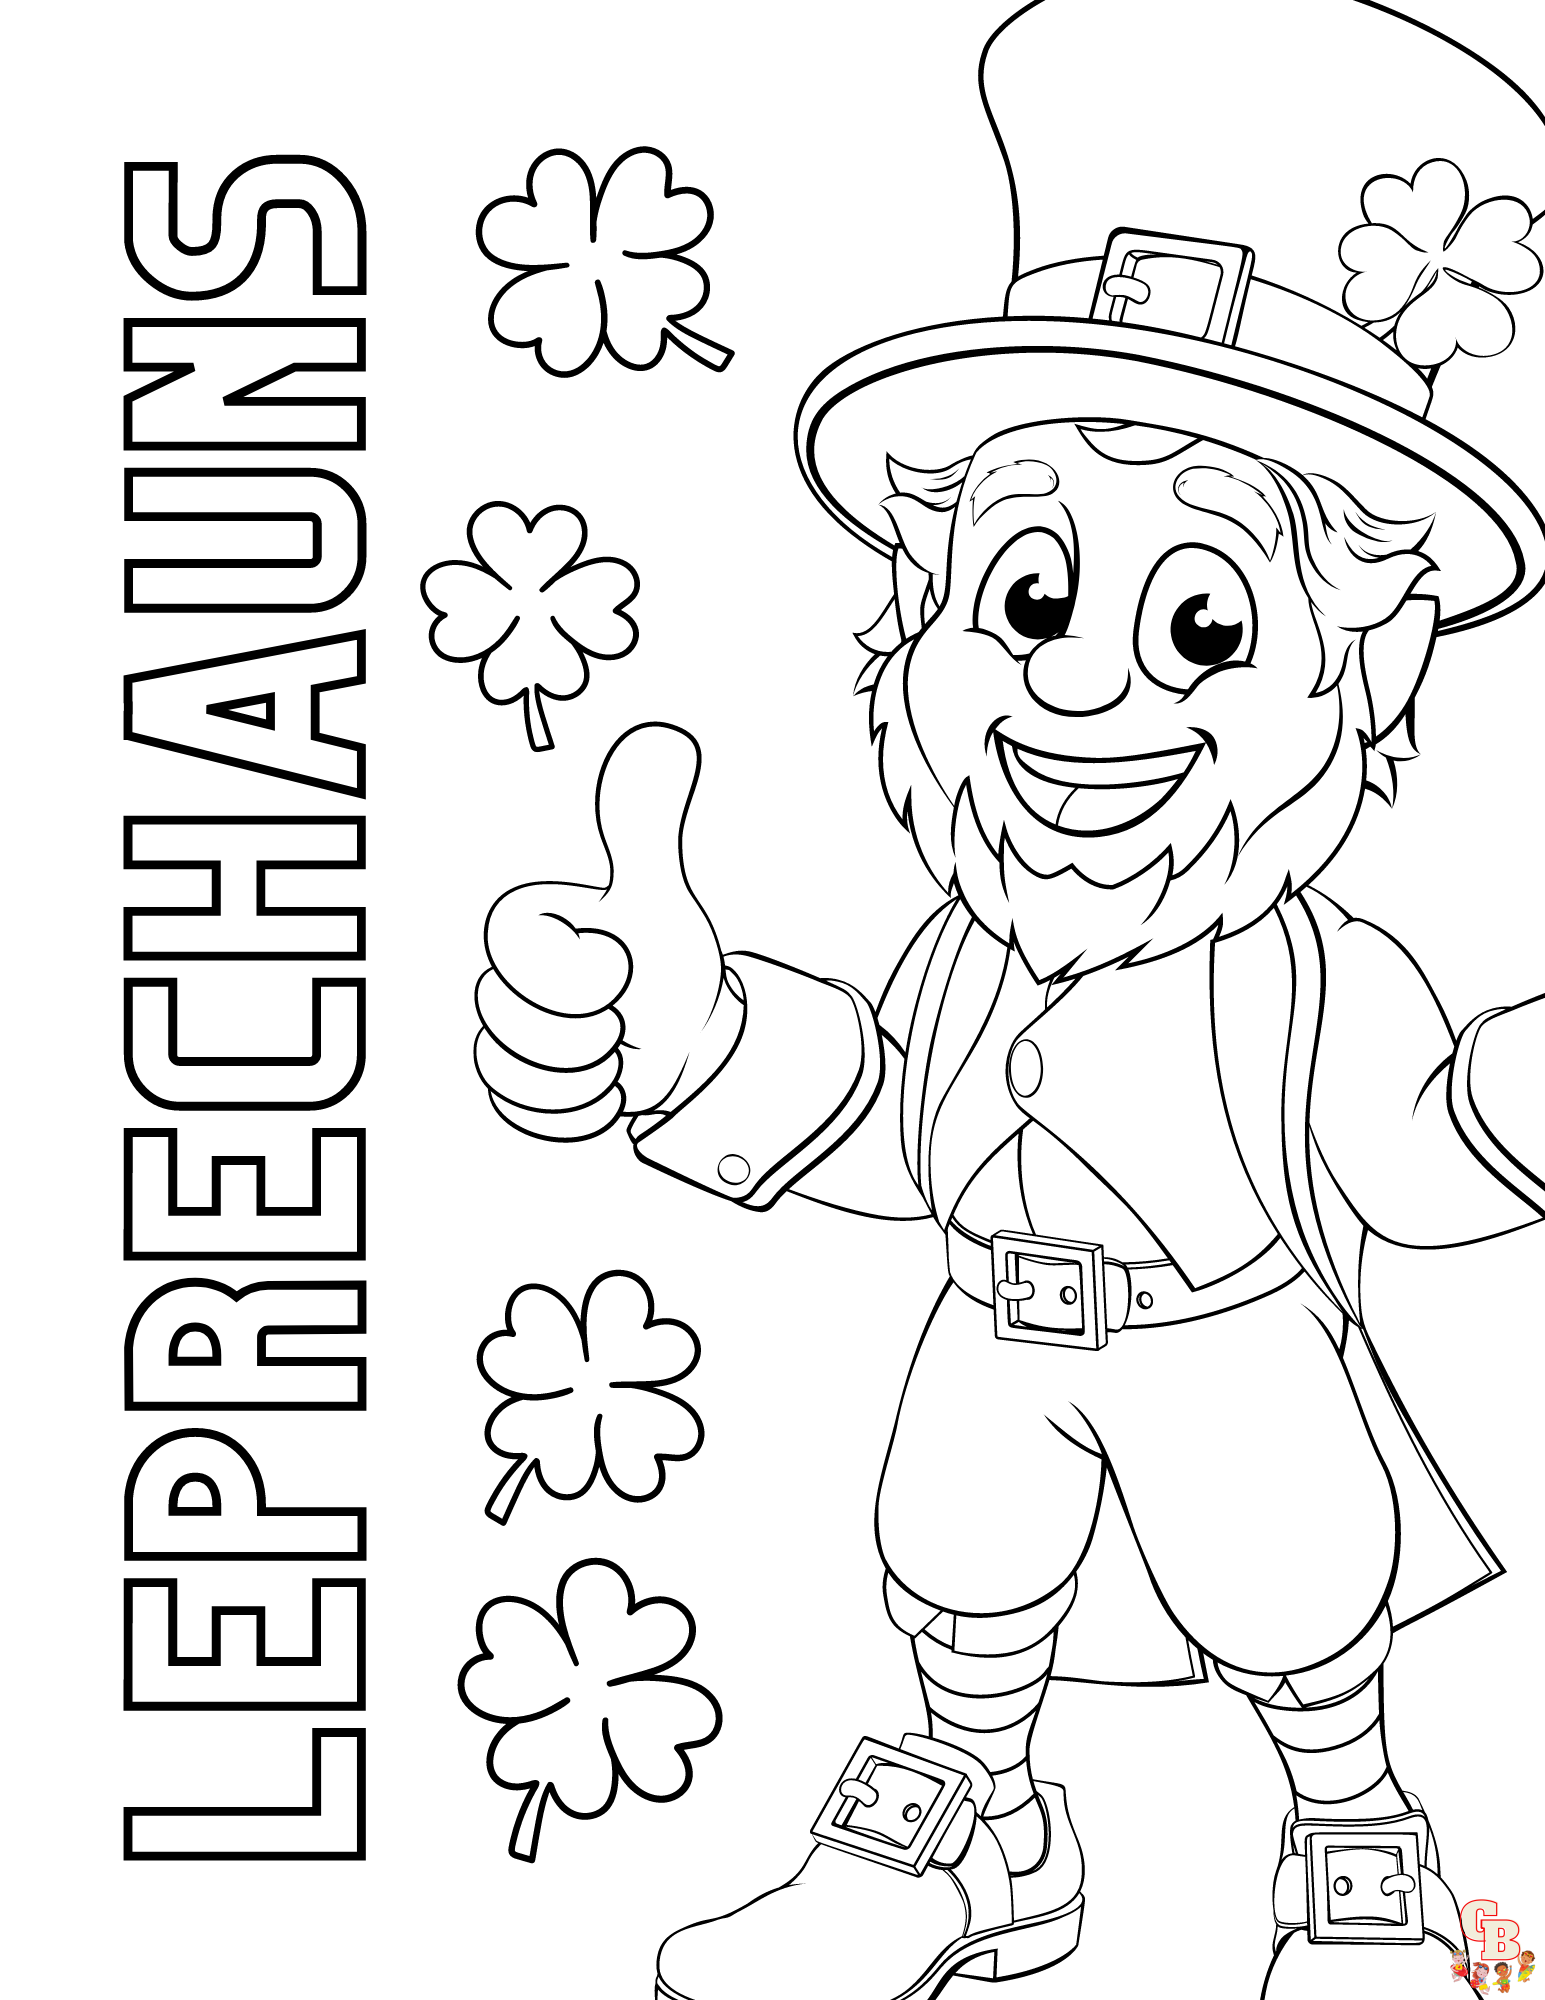 free-printable-leprechaun-coloring-pages-for-kids-gbcoloring